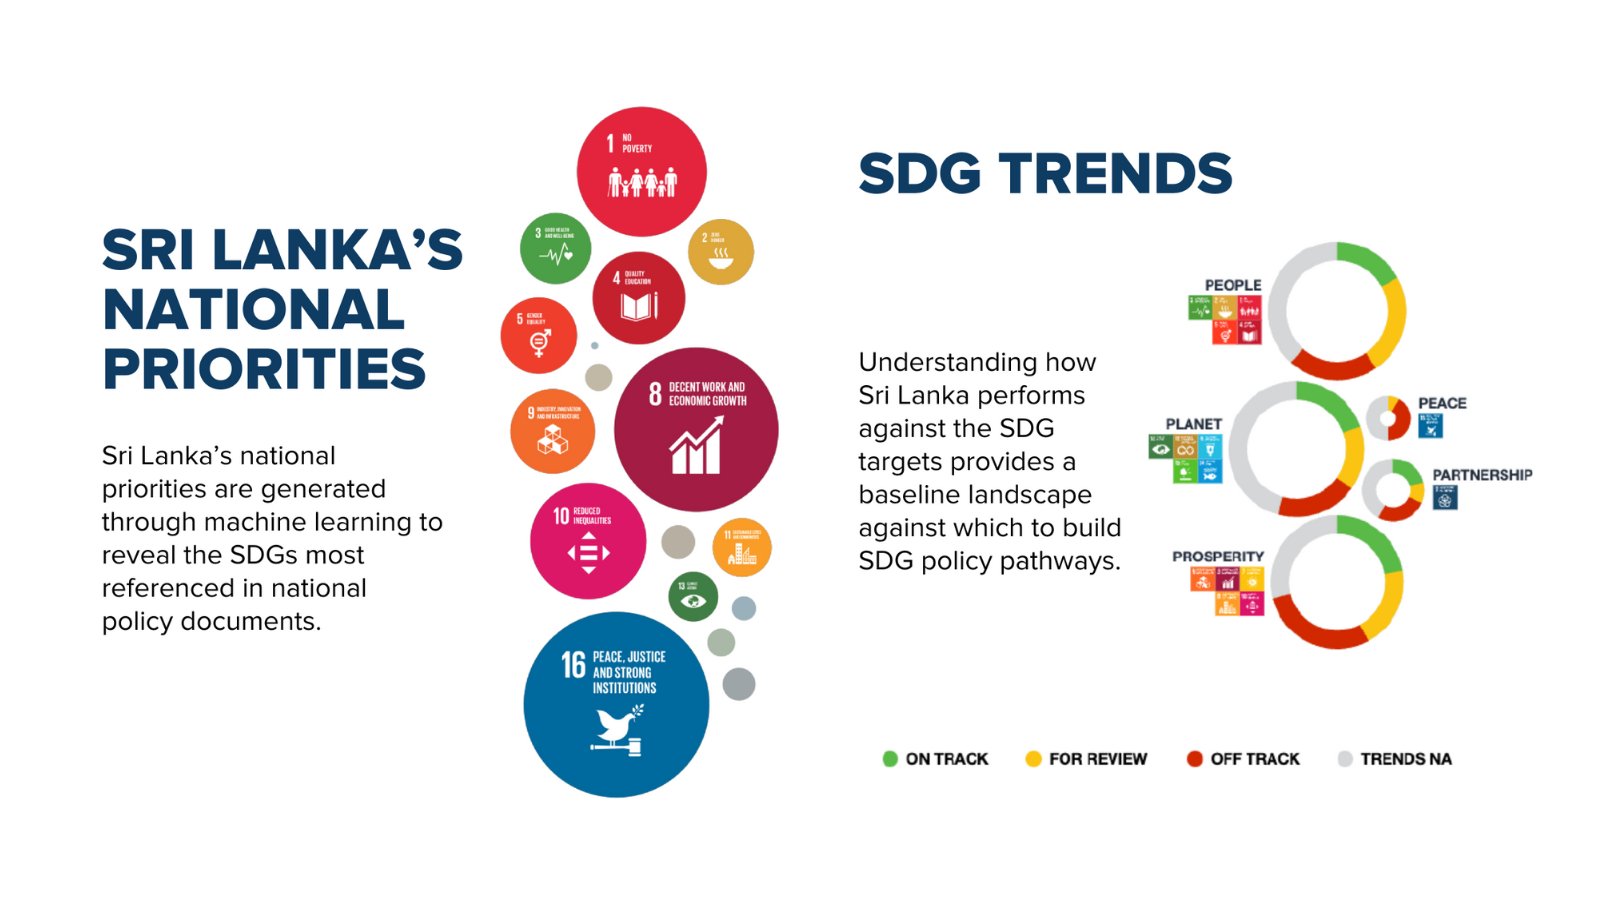 SDG National Priorities and trends